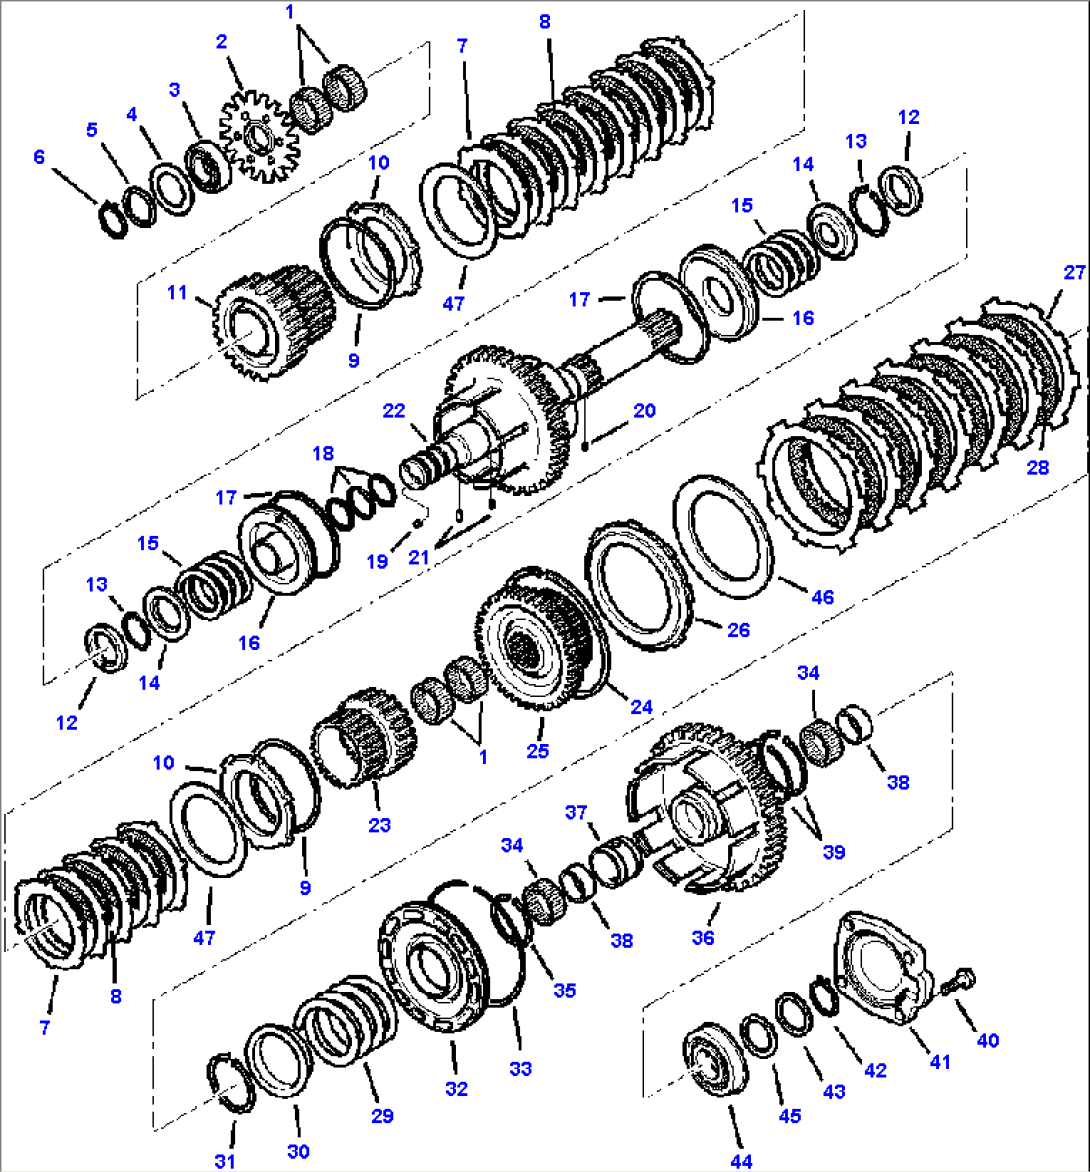 FIG. F3240-01A0 TRANSMISSION - 1ST, 3RD, AND 4TH GEAR CLUTCHES